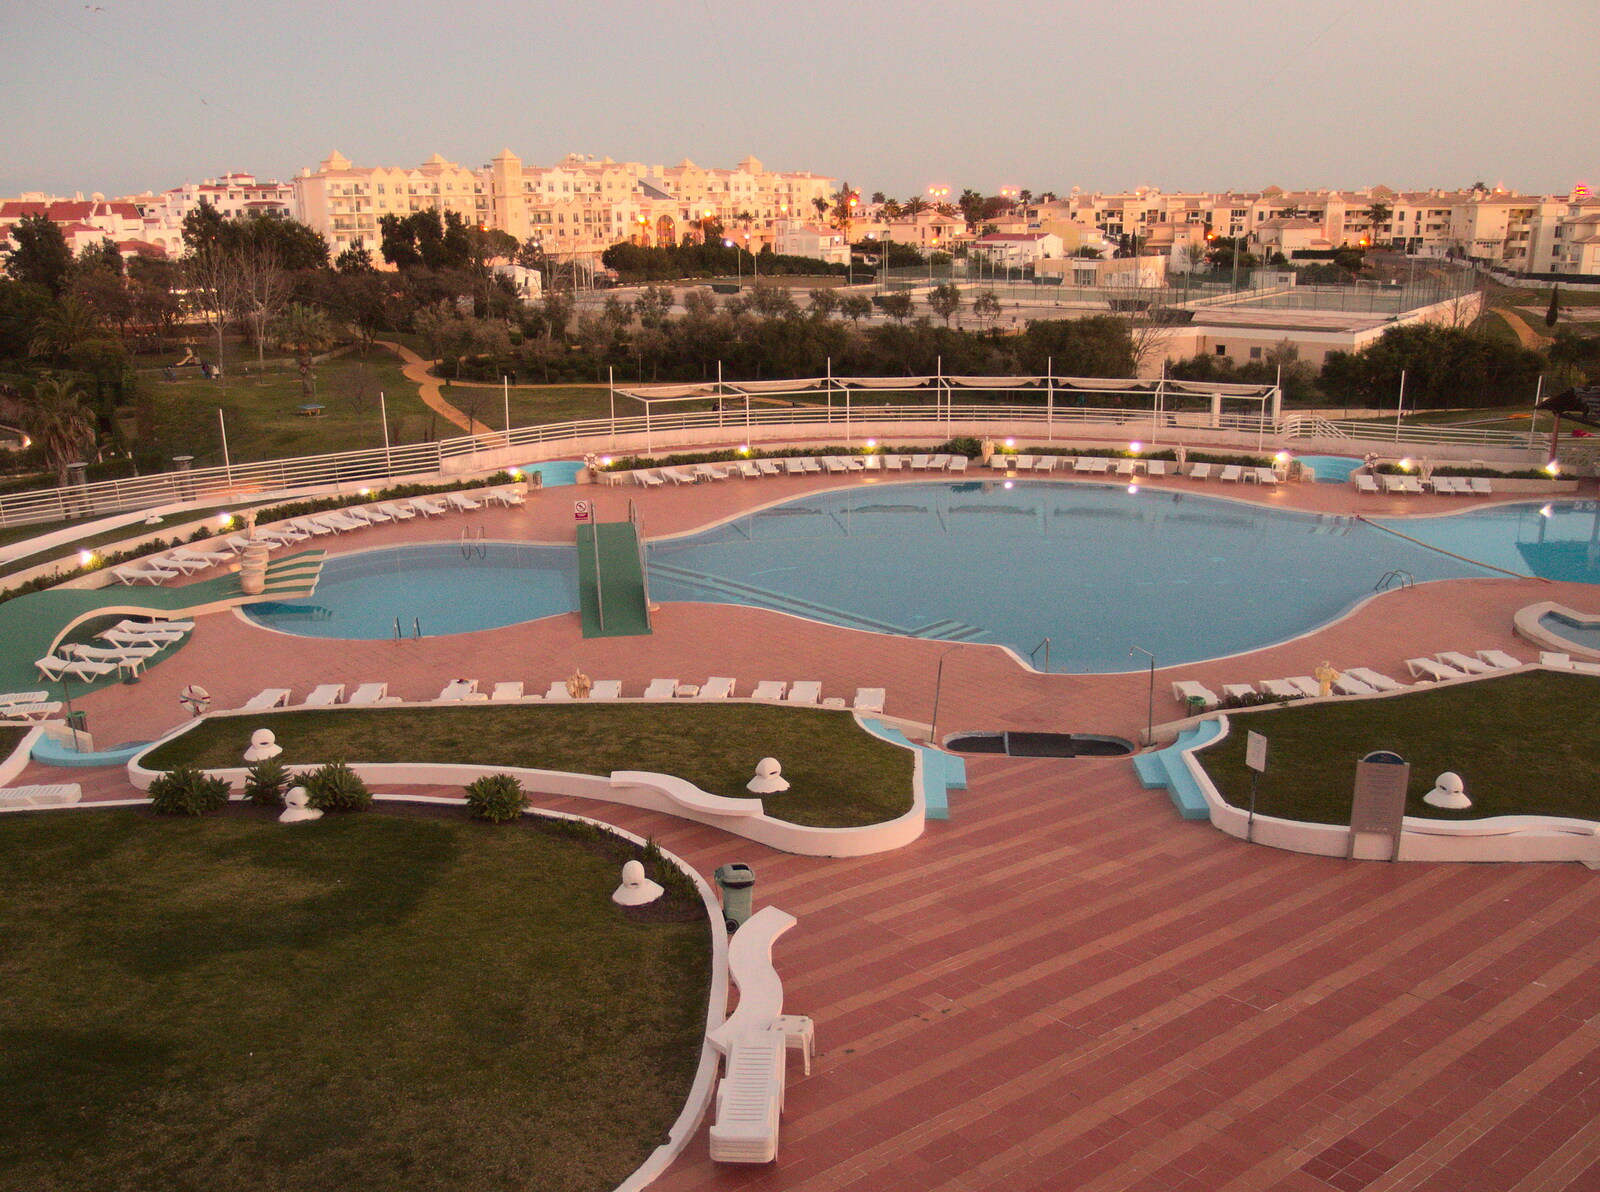 A view of the outdoor pool from Last Days and the Journey Home, Albufeira, Portugal - 9th April 2016